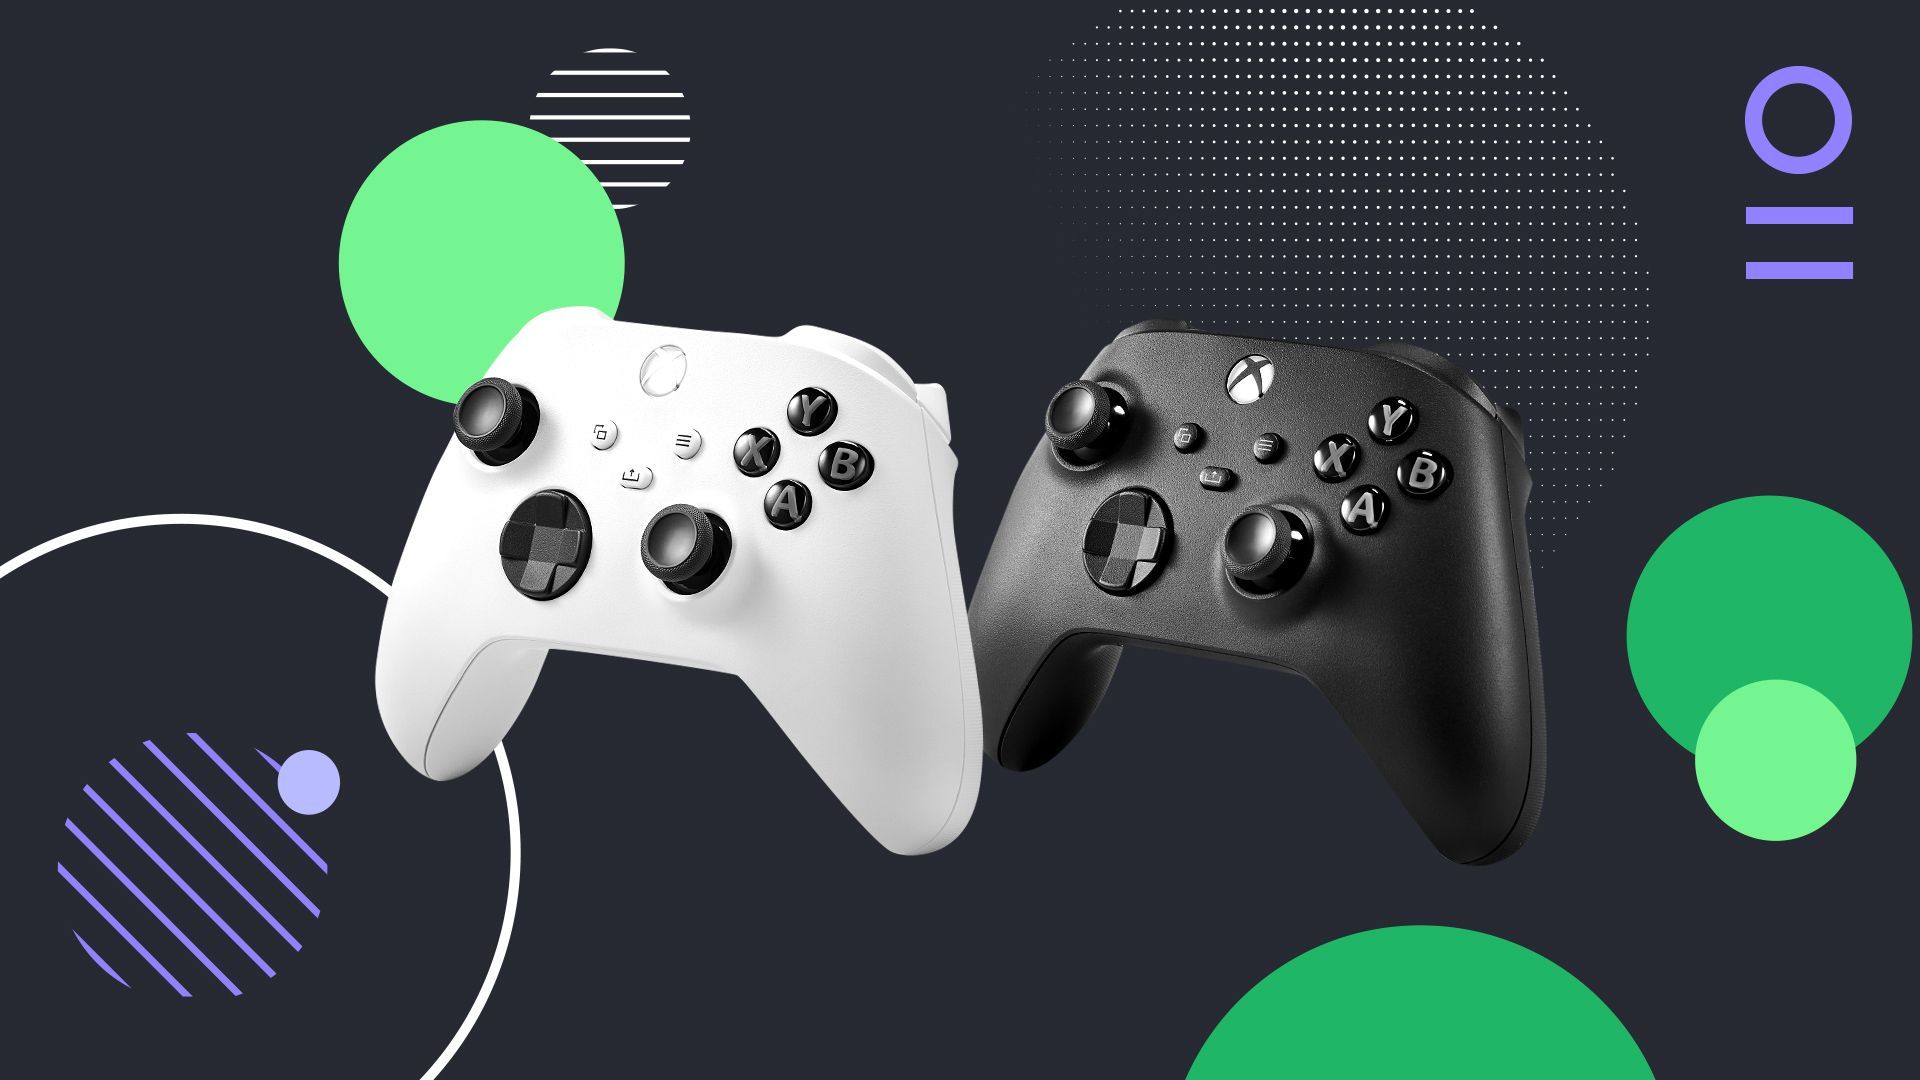 Photo illustration of Xbox controllers and abstract shapes.